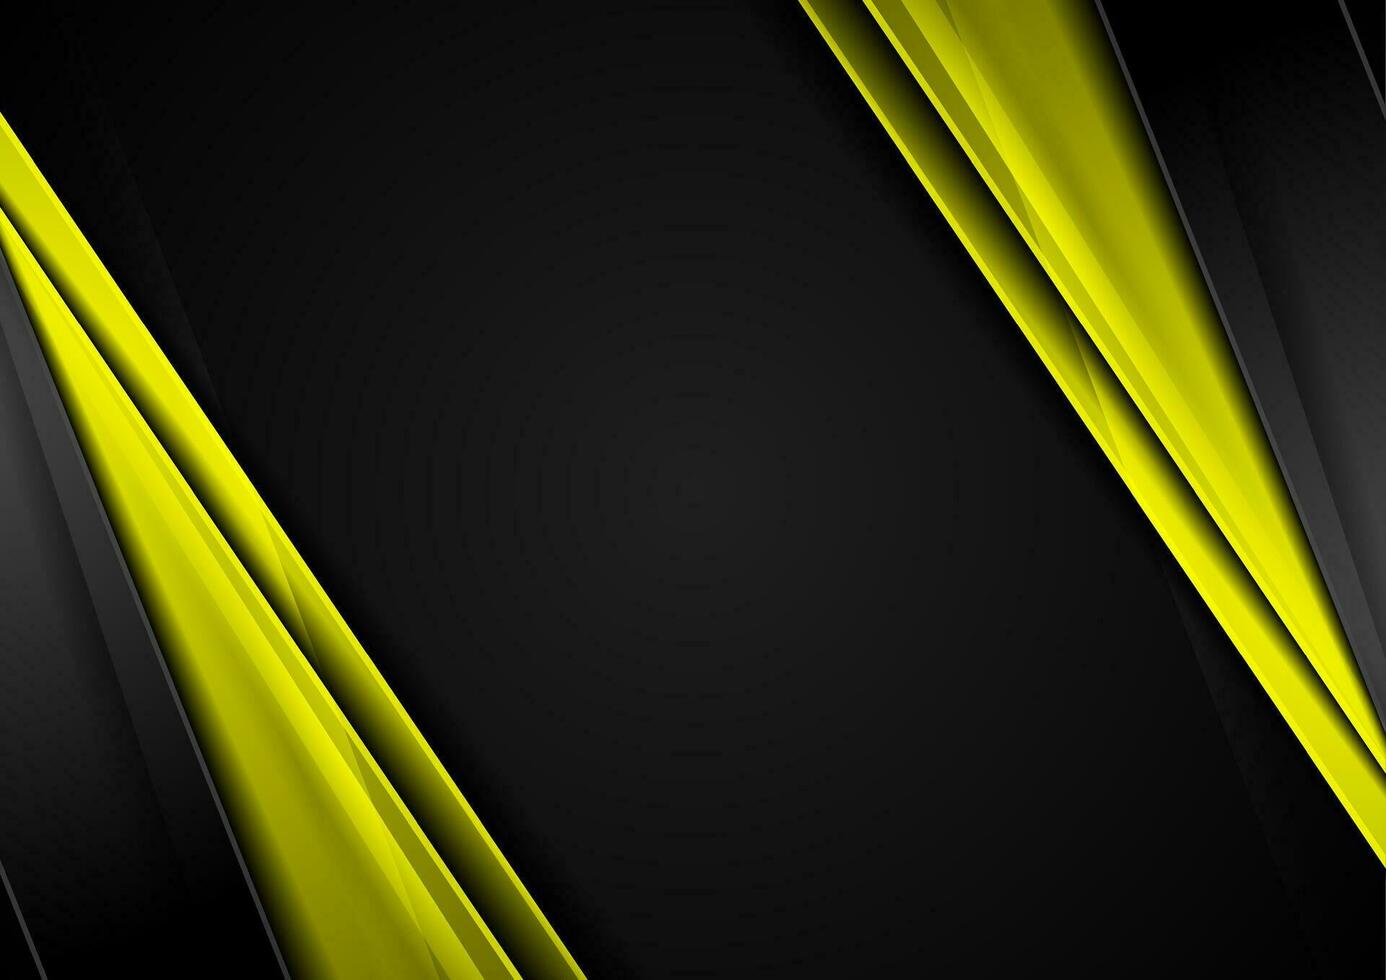 High contrast yellow black abstract tech corporate background vector